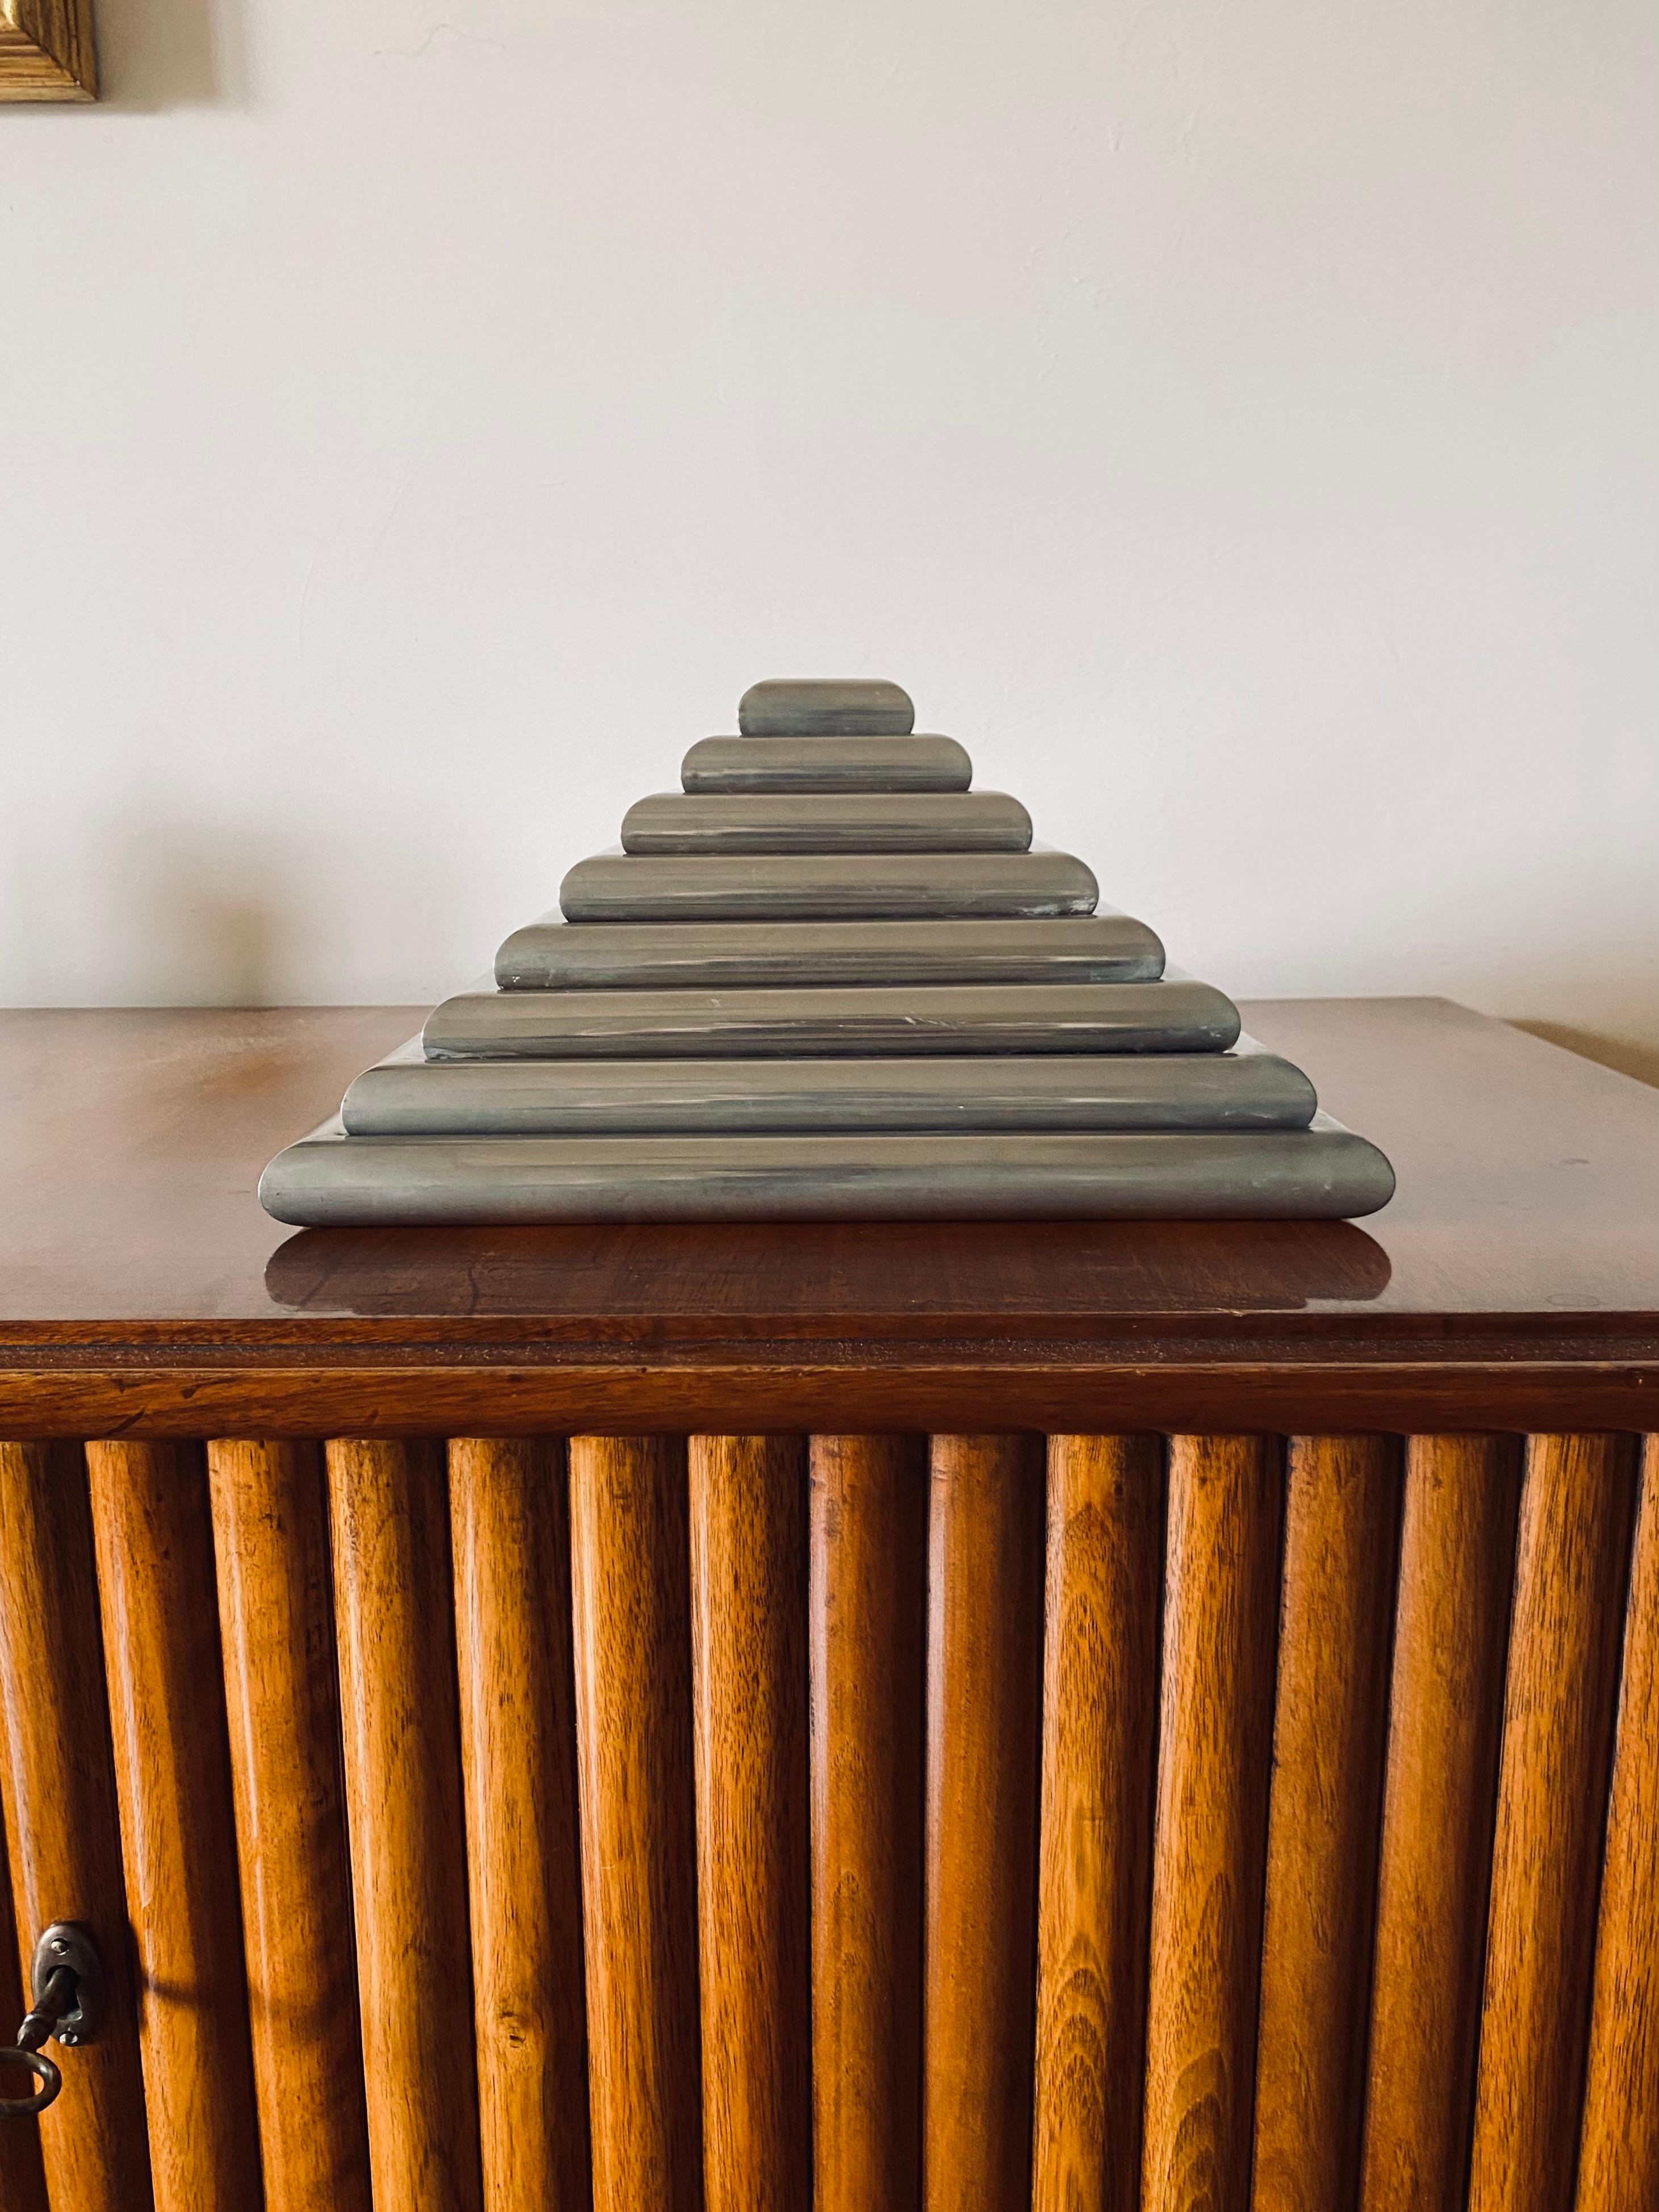 Ziggurat-shaped stacked trays / vide poche sculpture

Italy 1970s

in the manner of Willy Rizzo

Set of 7 mirrored trays / ashtrays / vide poche

H 19 cm

31 x 31 cm

Conditions: very good consistent with age and use.